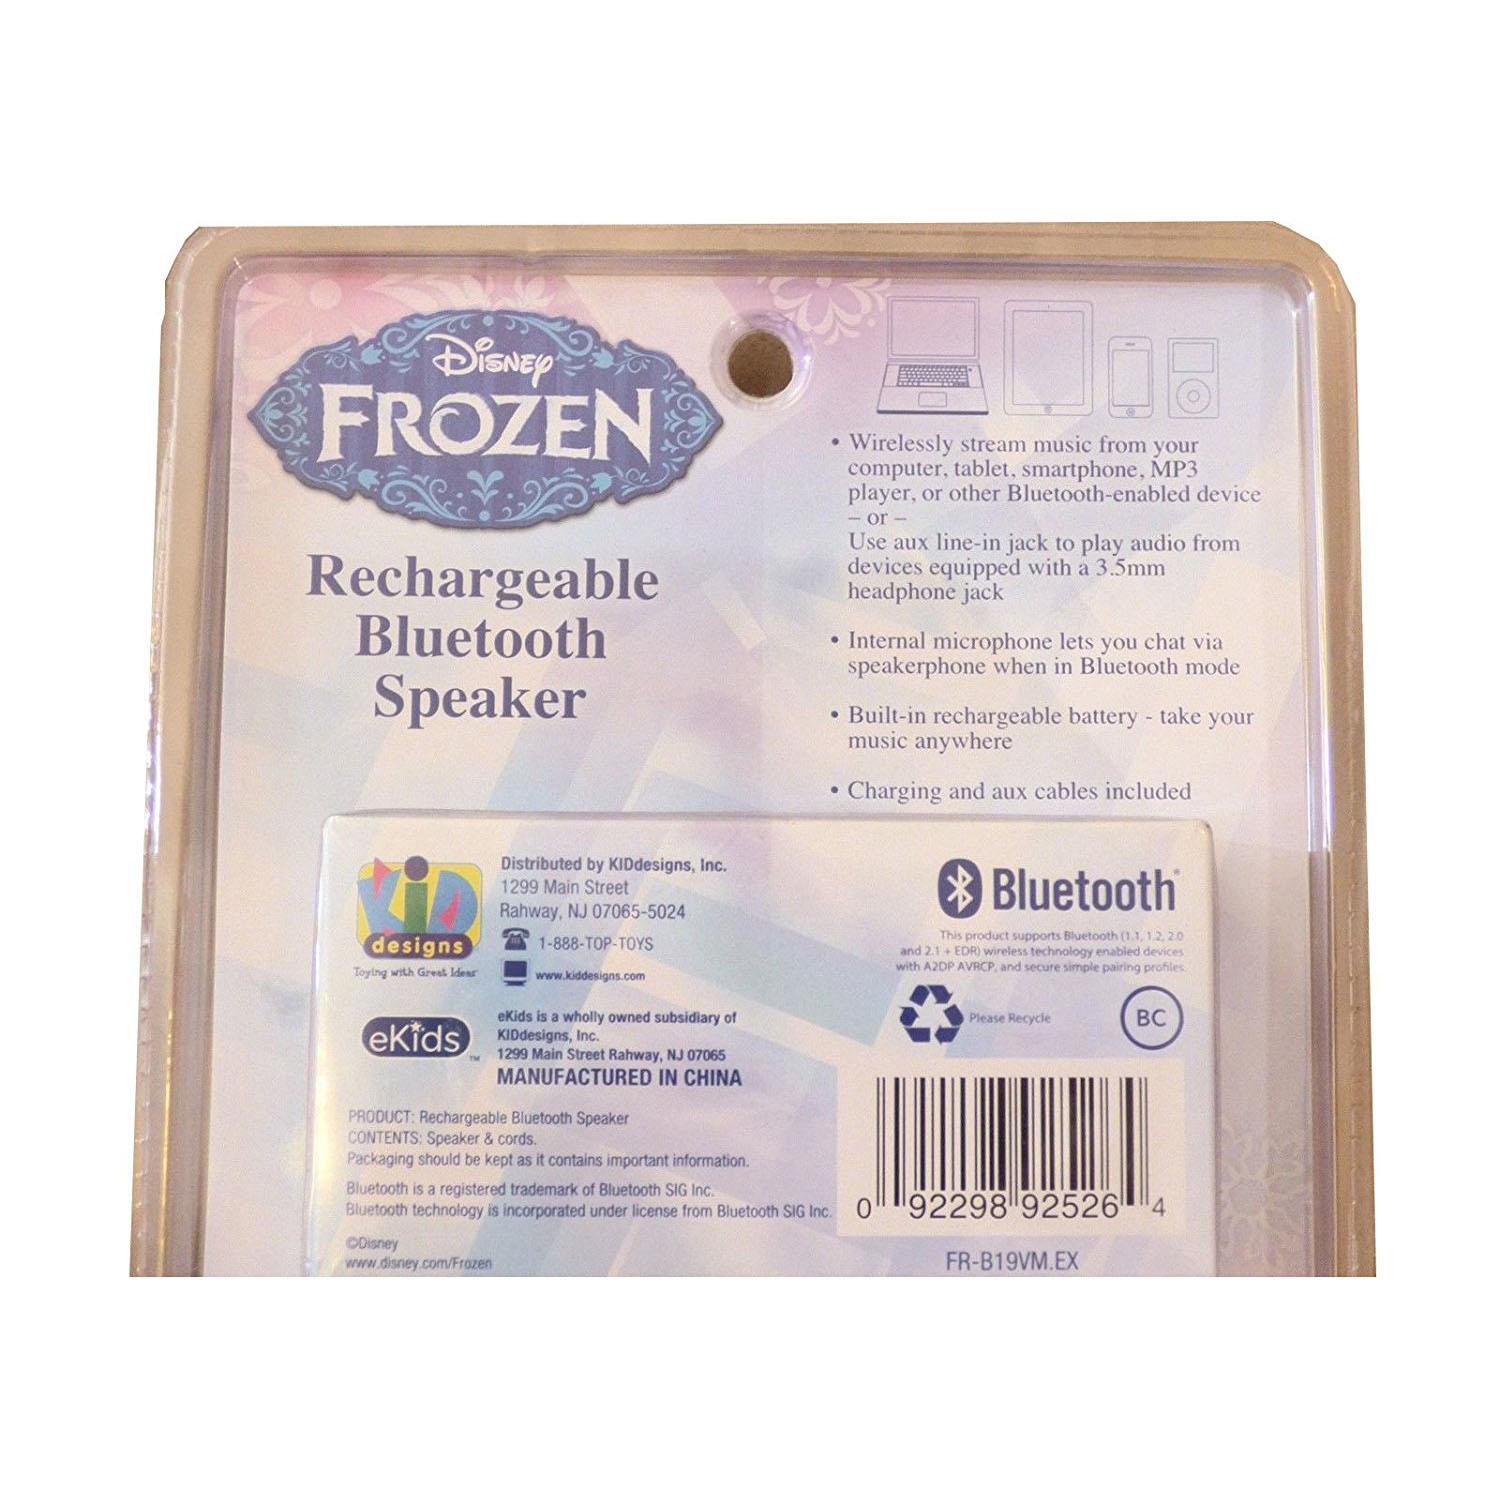 disney frozen bluetooth speaker - wireless rechargeable portable speaker with 3.5mm headphone port device, stream music from computer, tablet, smartphone mp3 player or other bluetooth-enabled device - image 4 of 4